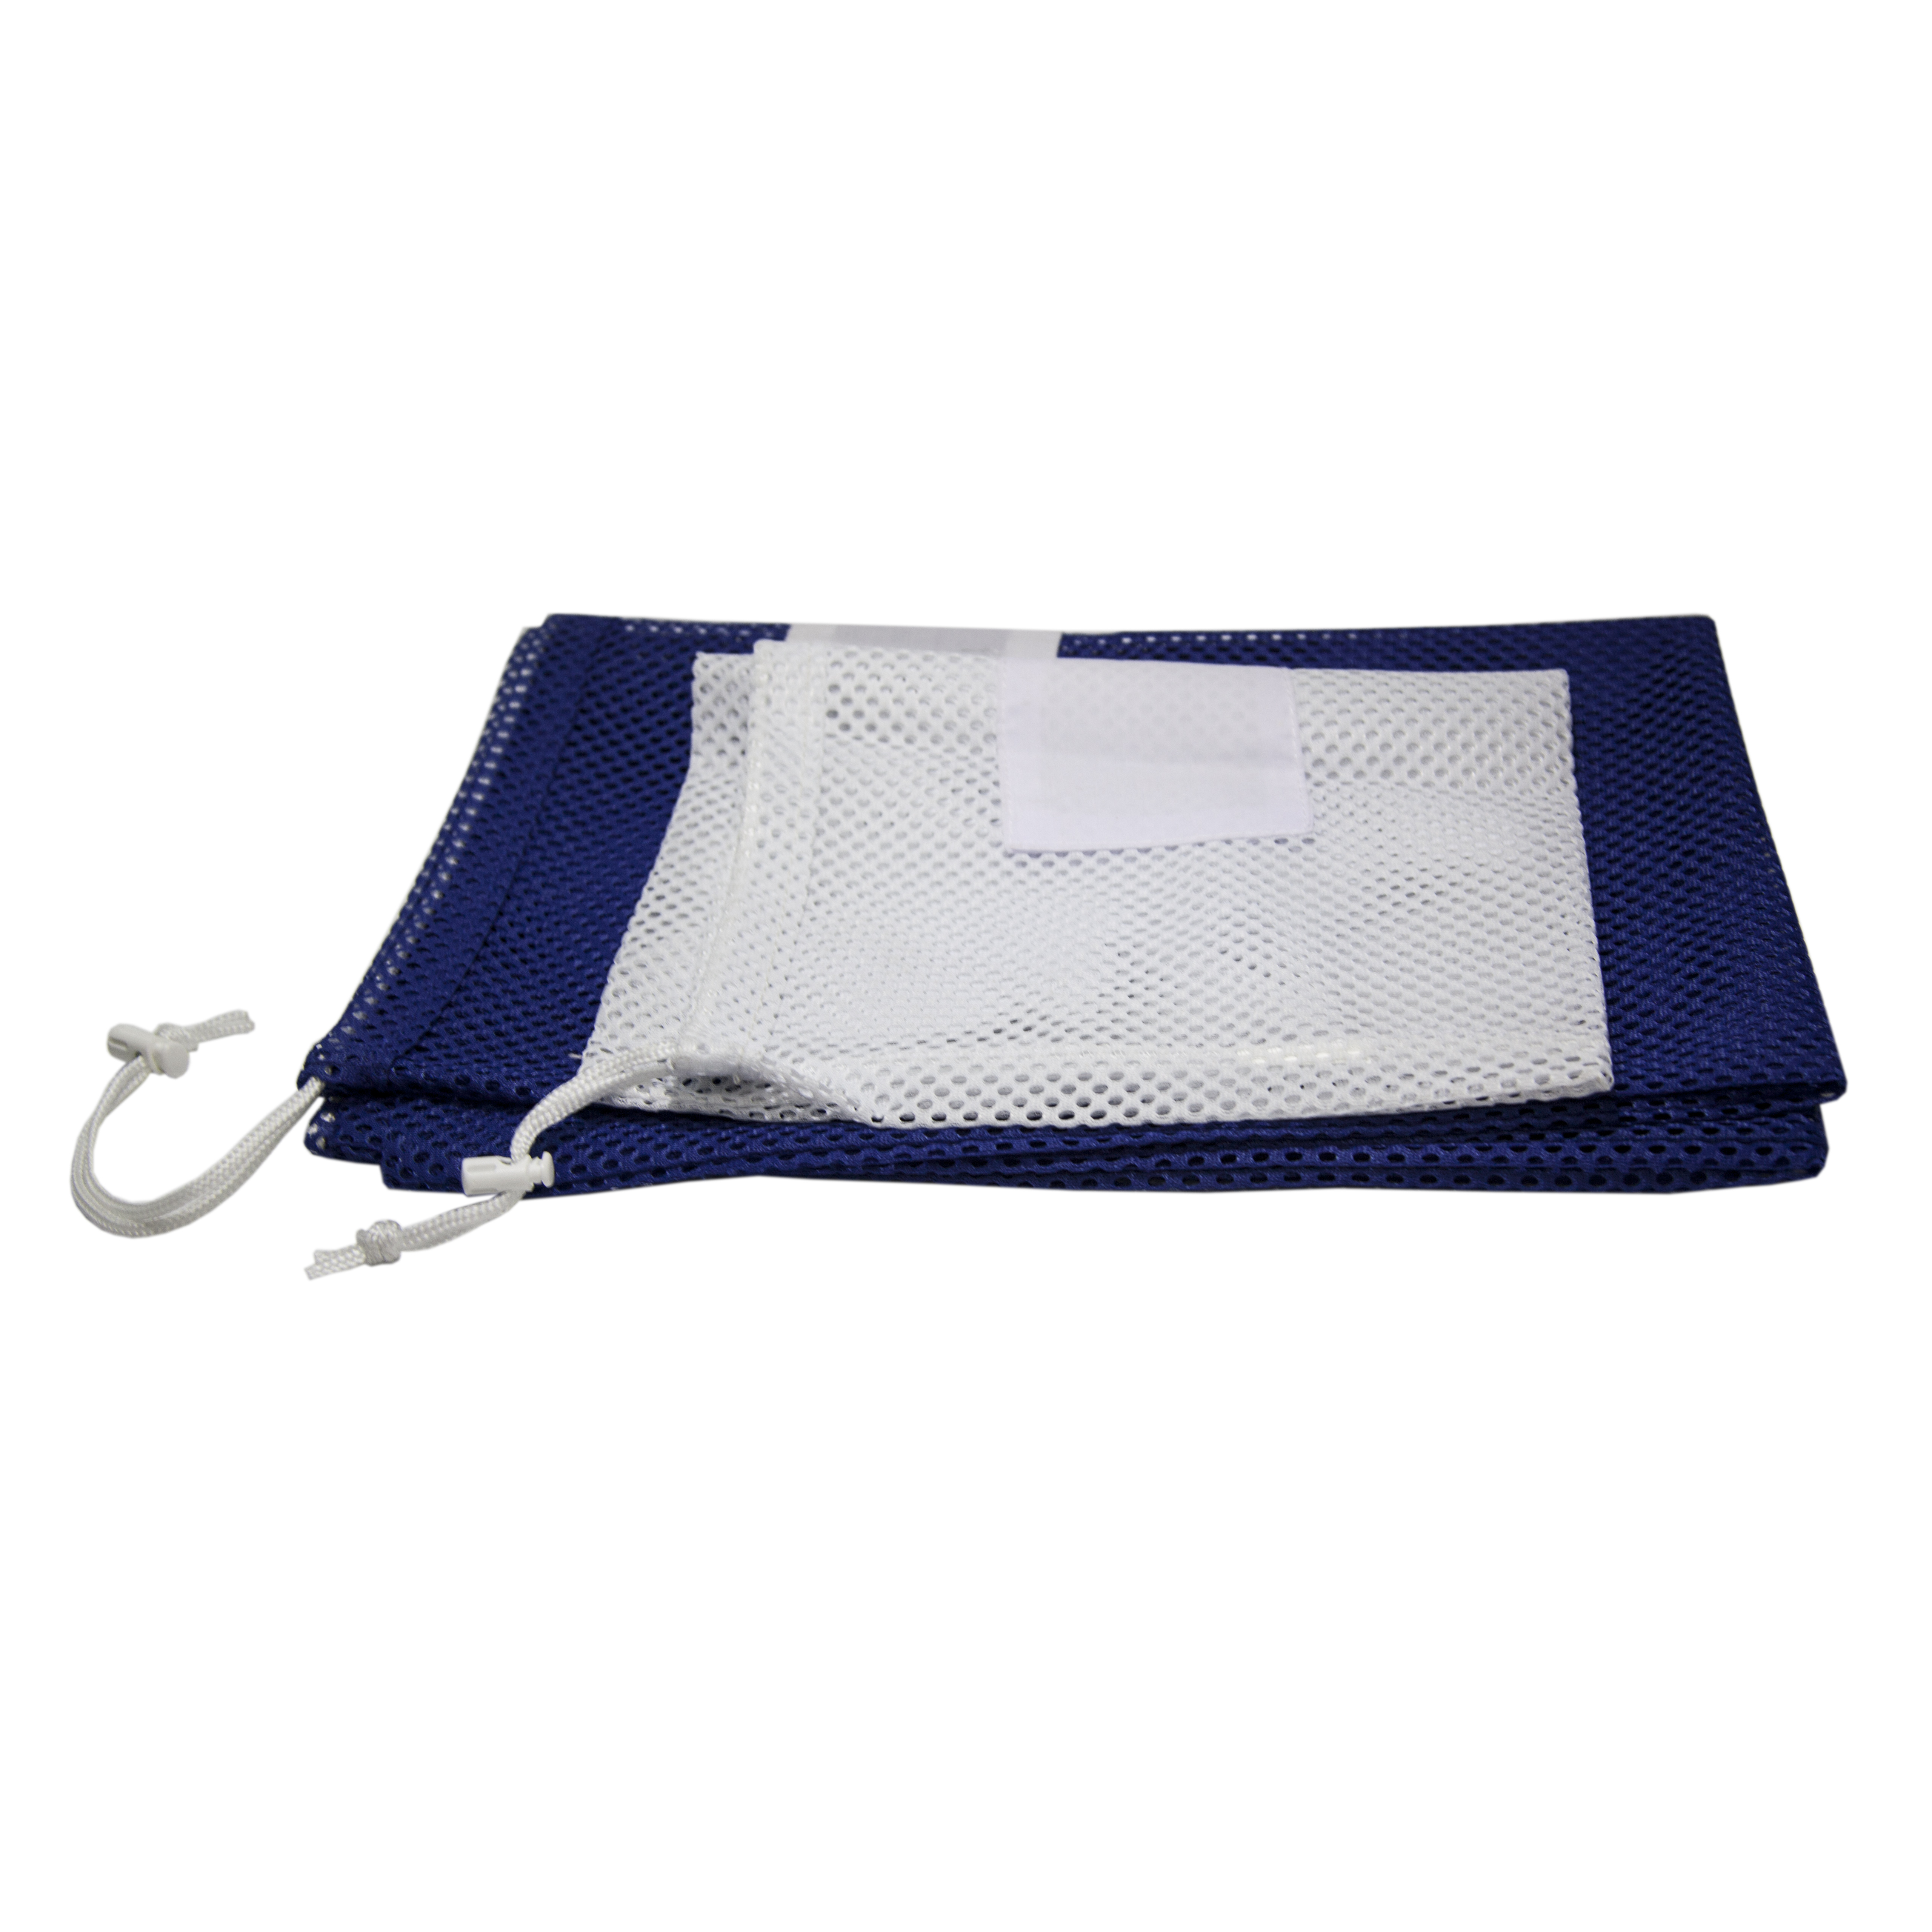 Laundry washing Bag & Commercial Laundry bags